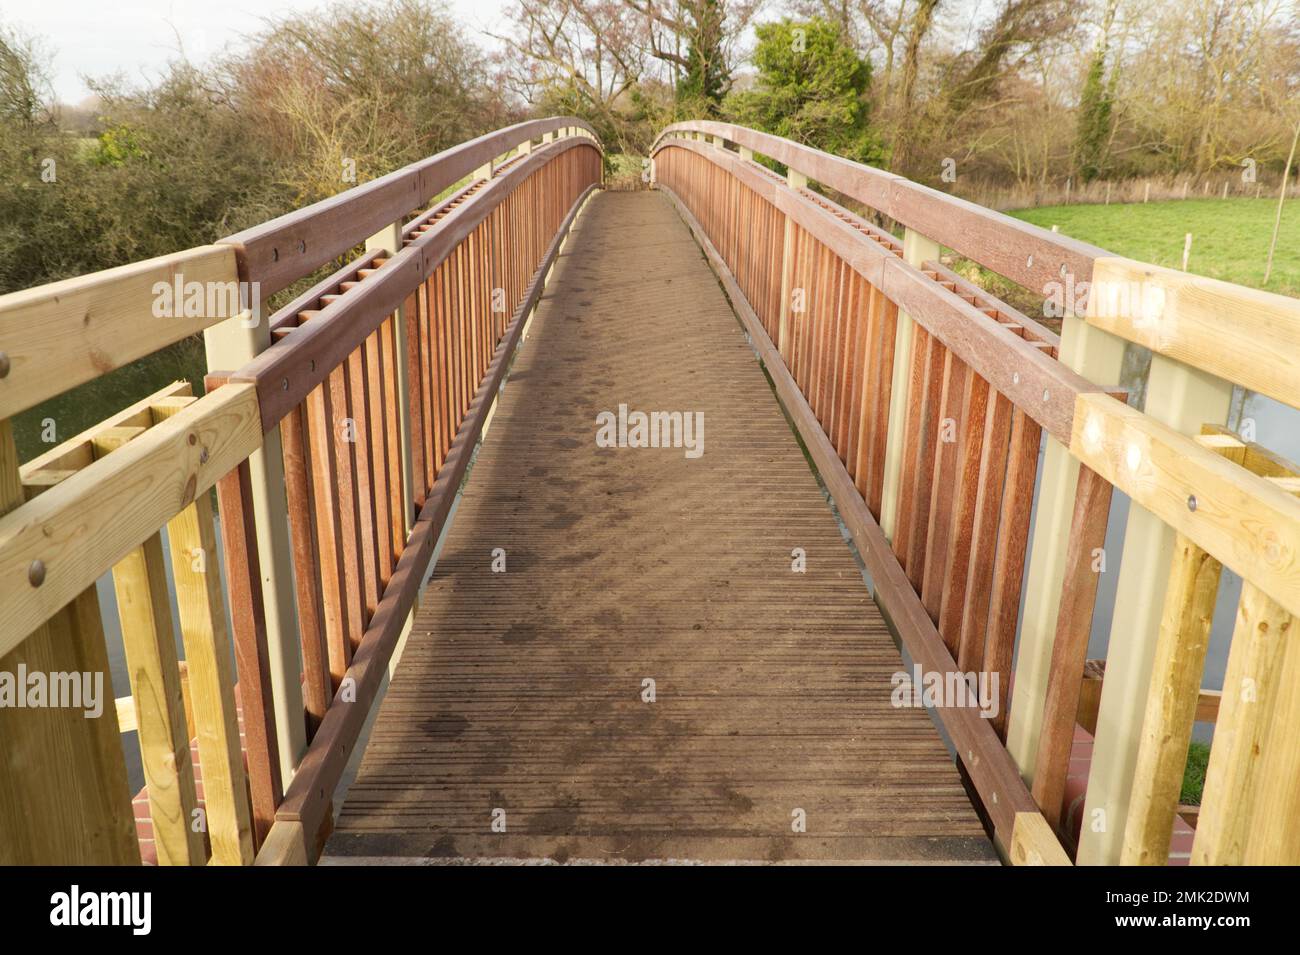 Looking along the length of the new Fen Bridge which stretches over the River Stour in the Dedham Vale on the Essex and Suffolk border. Stock Photo